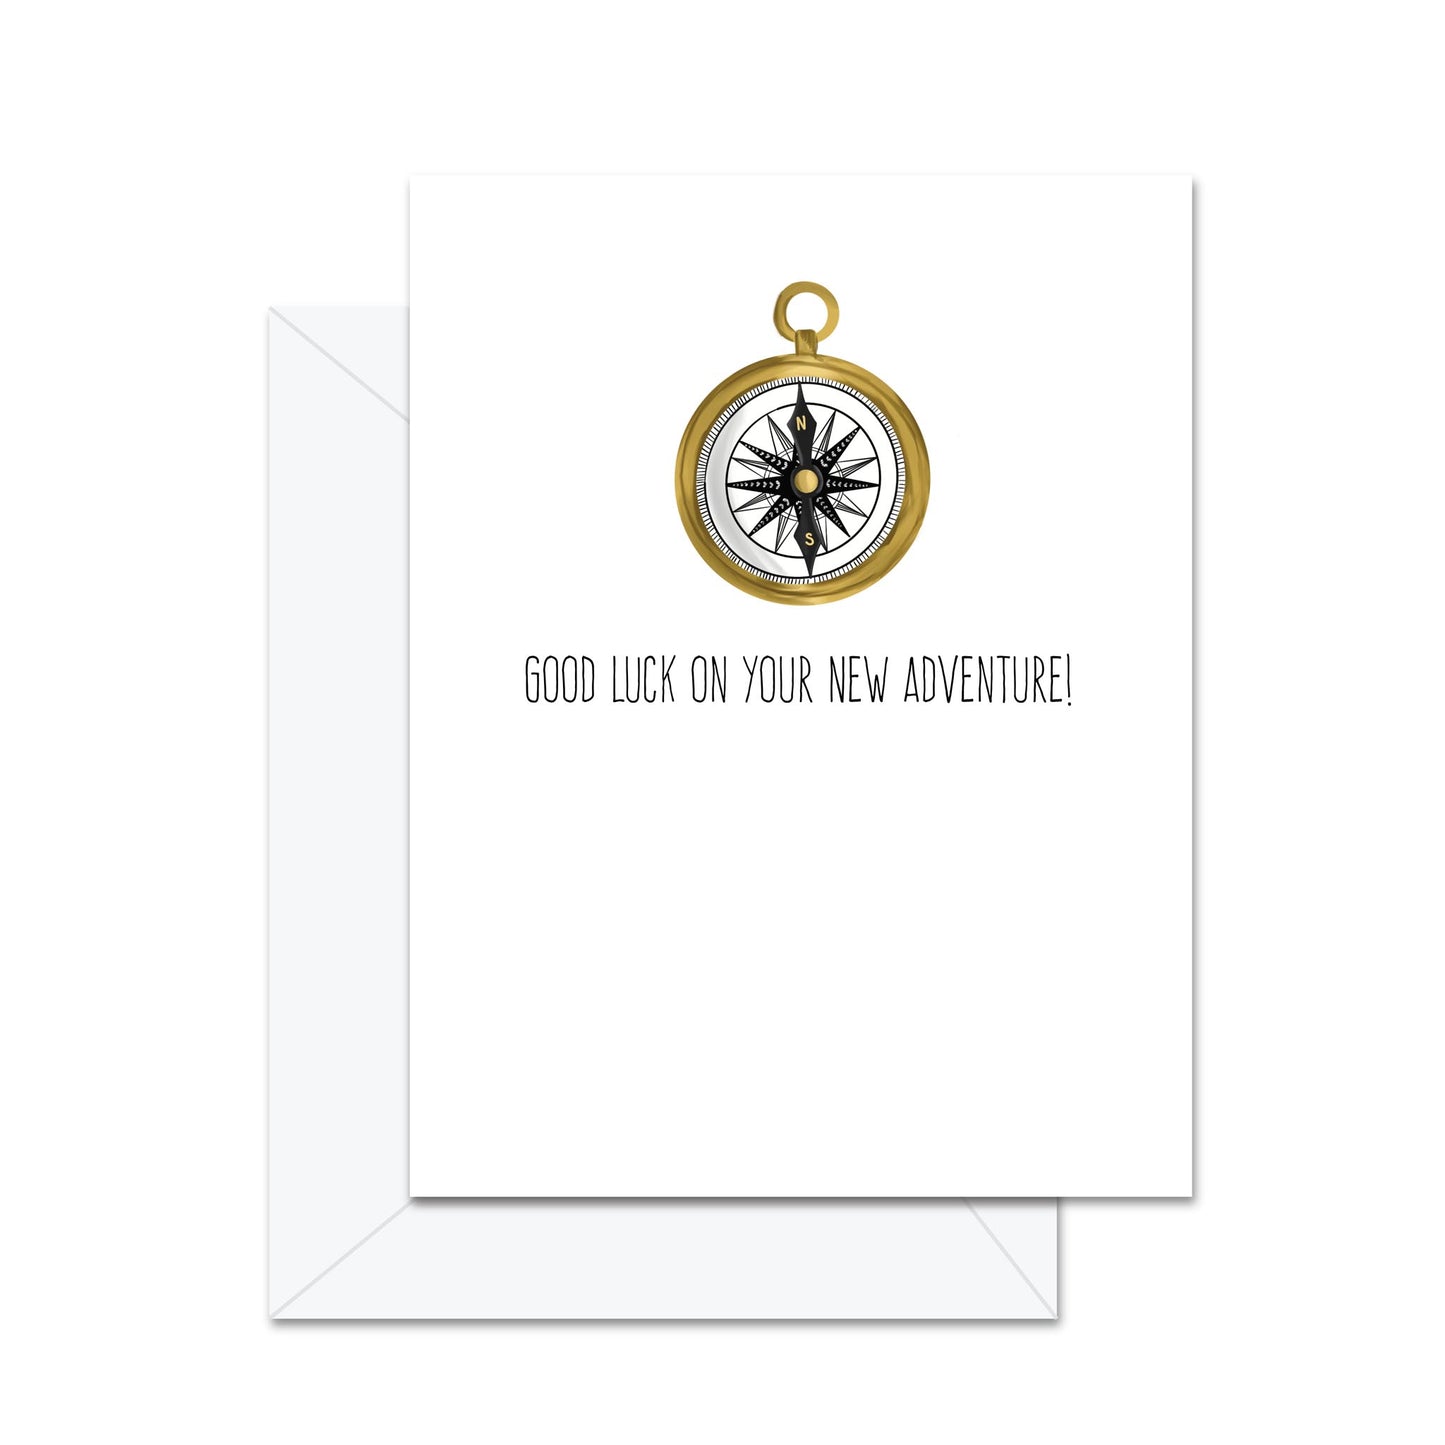 Good Luck On Your New Adventure! - Greeting Card